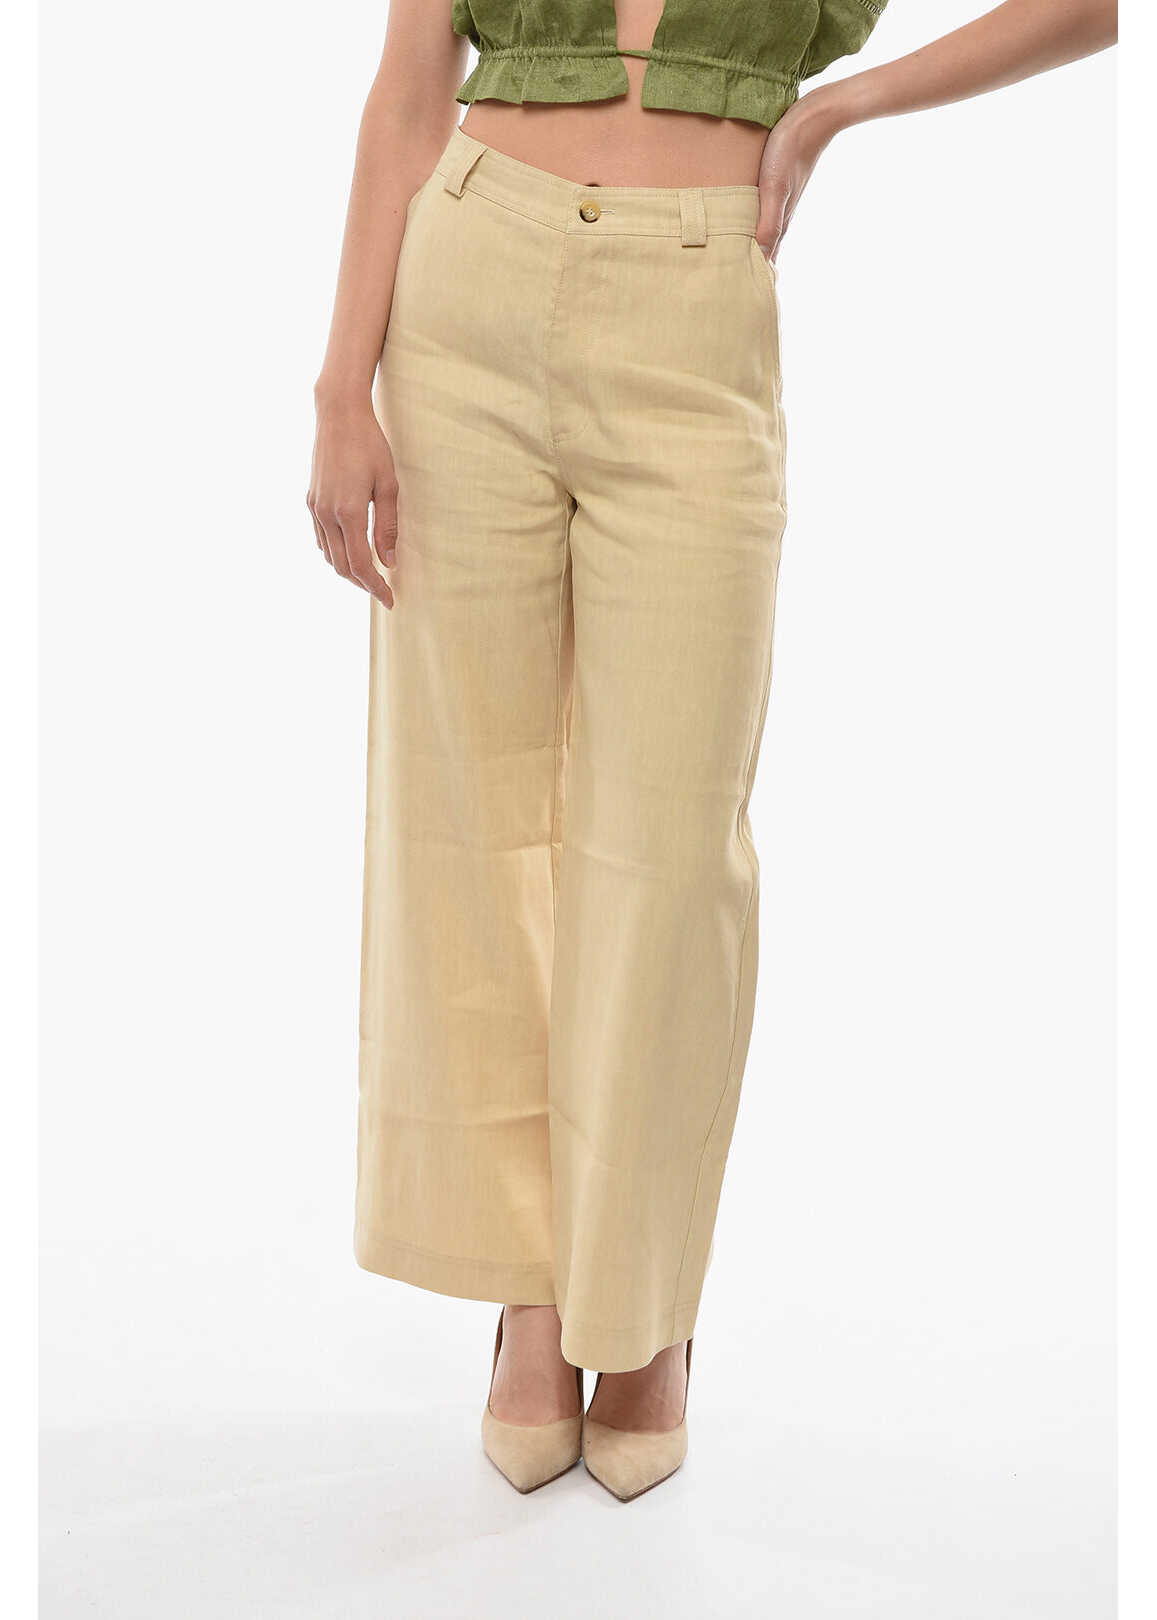 RODEBJER Flax Blend Rodebjer Annie Pants With Belt Loops Beige